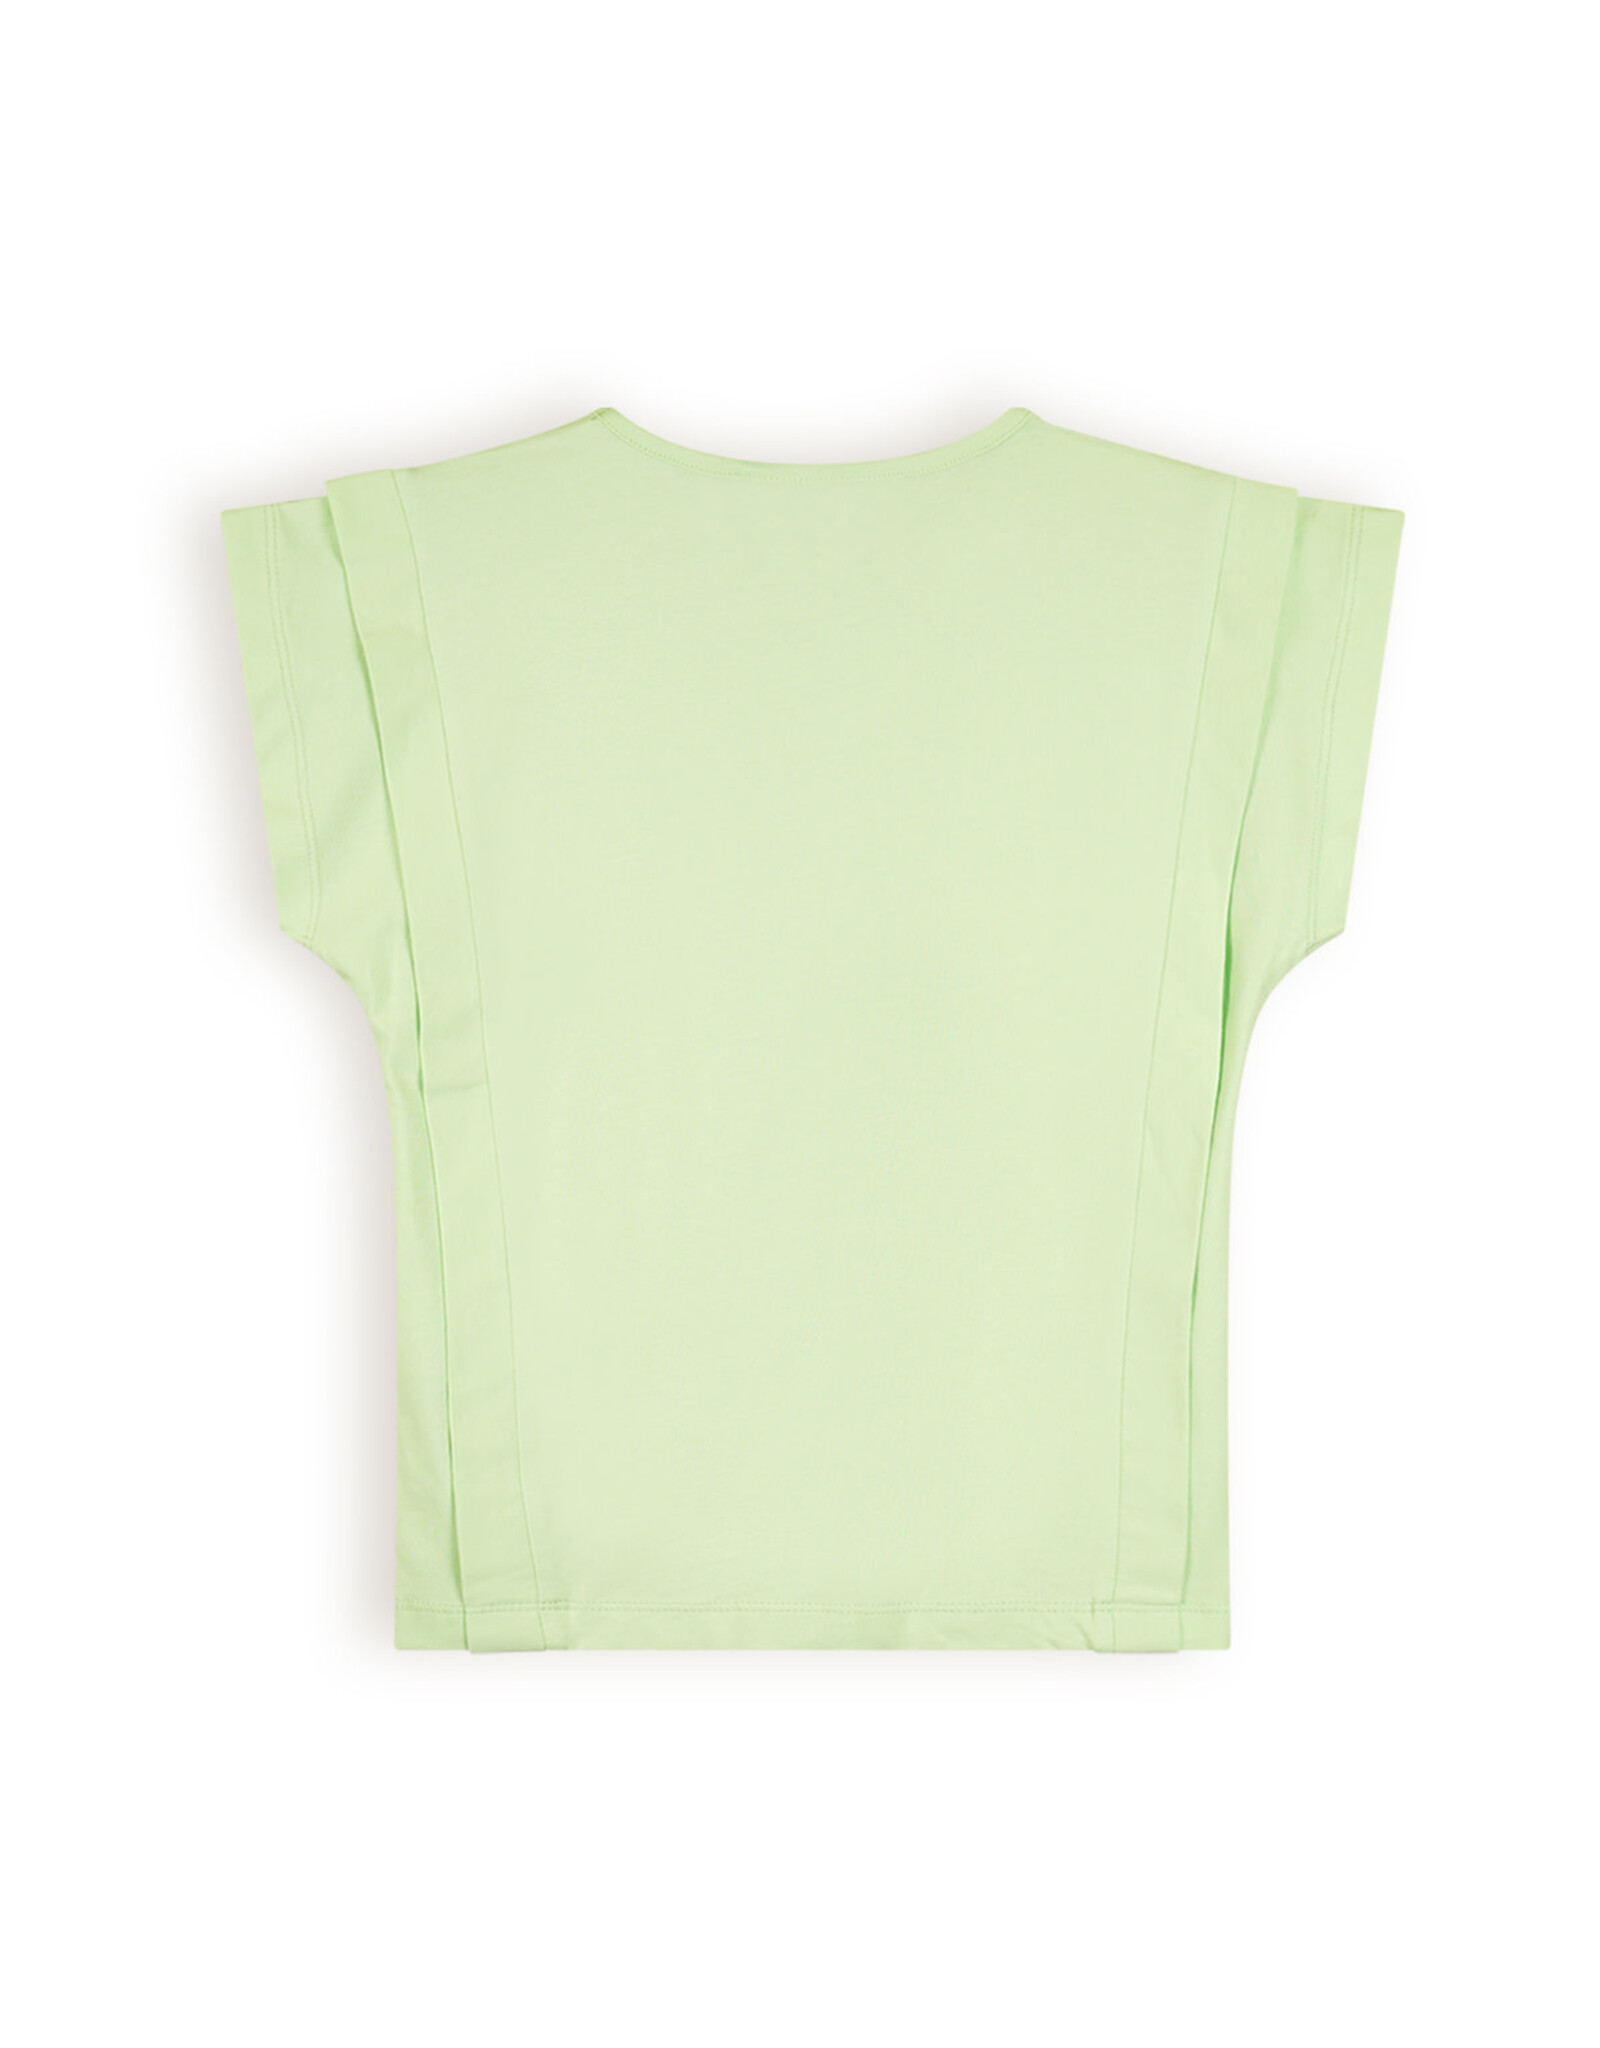 Nono Kiam T-Shirt with Today print Spring Meadow Green